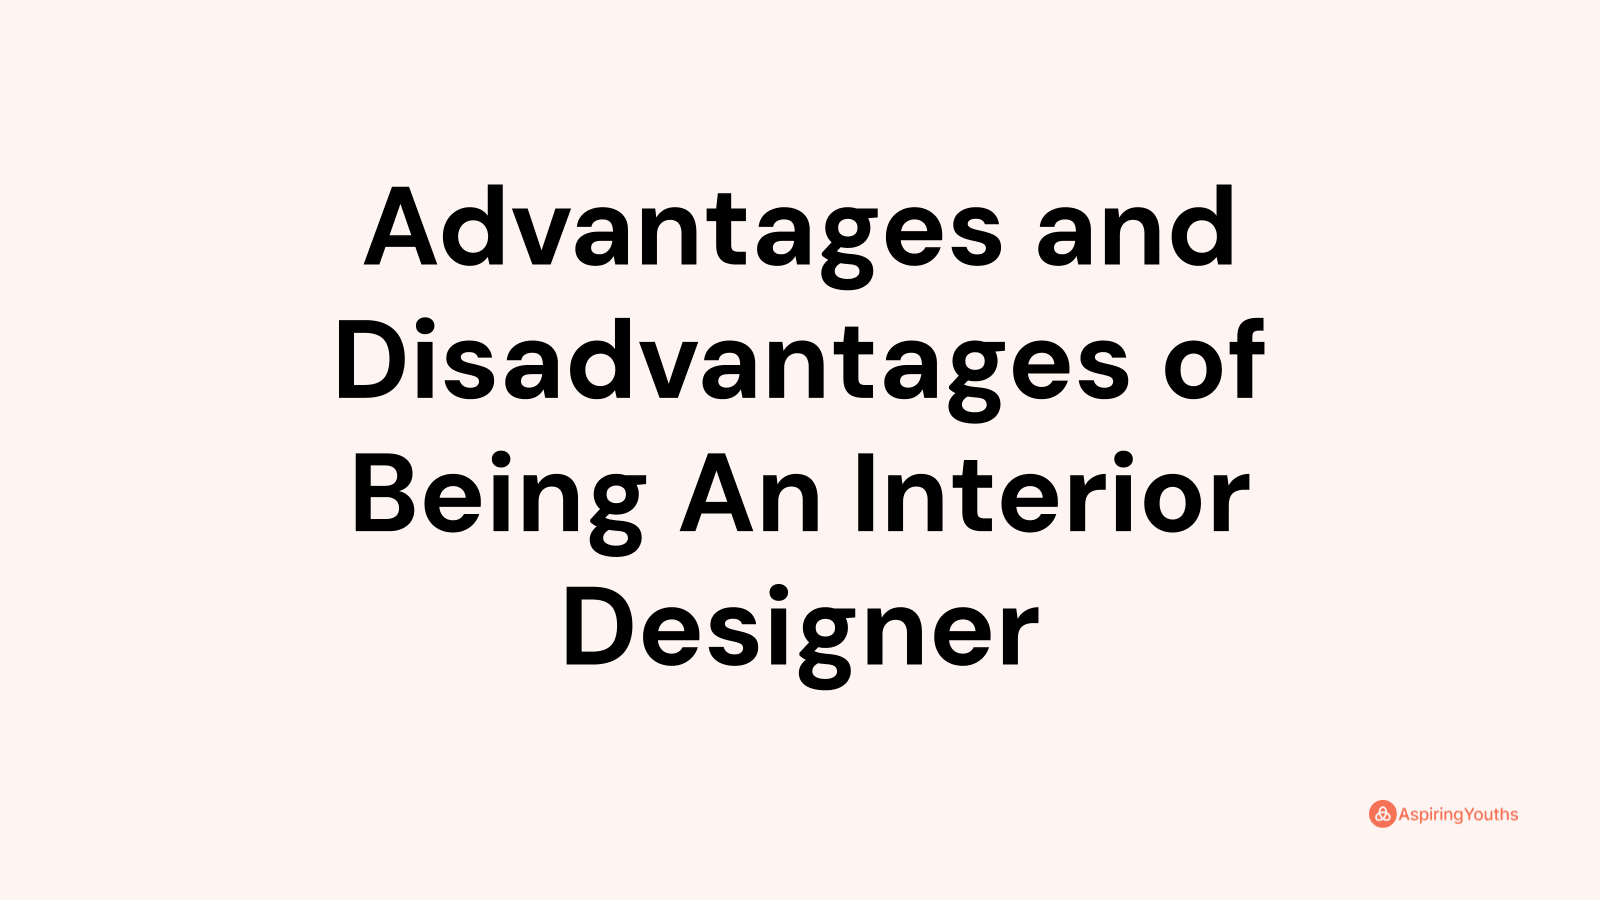 Advantages and disadvantages of Being An Interior Designer